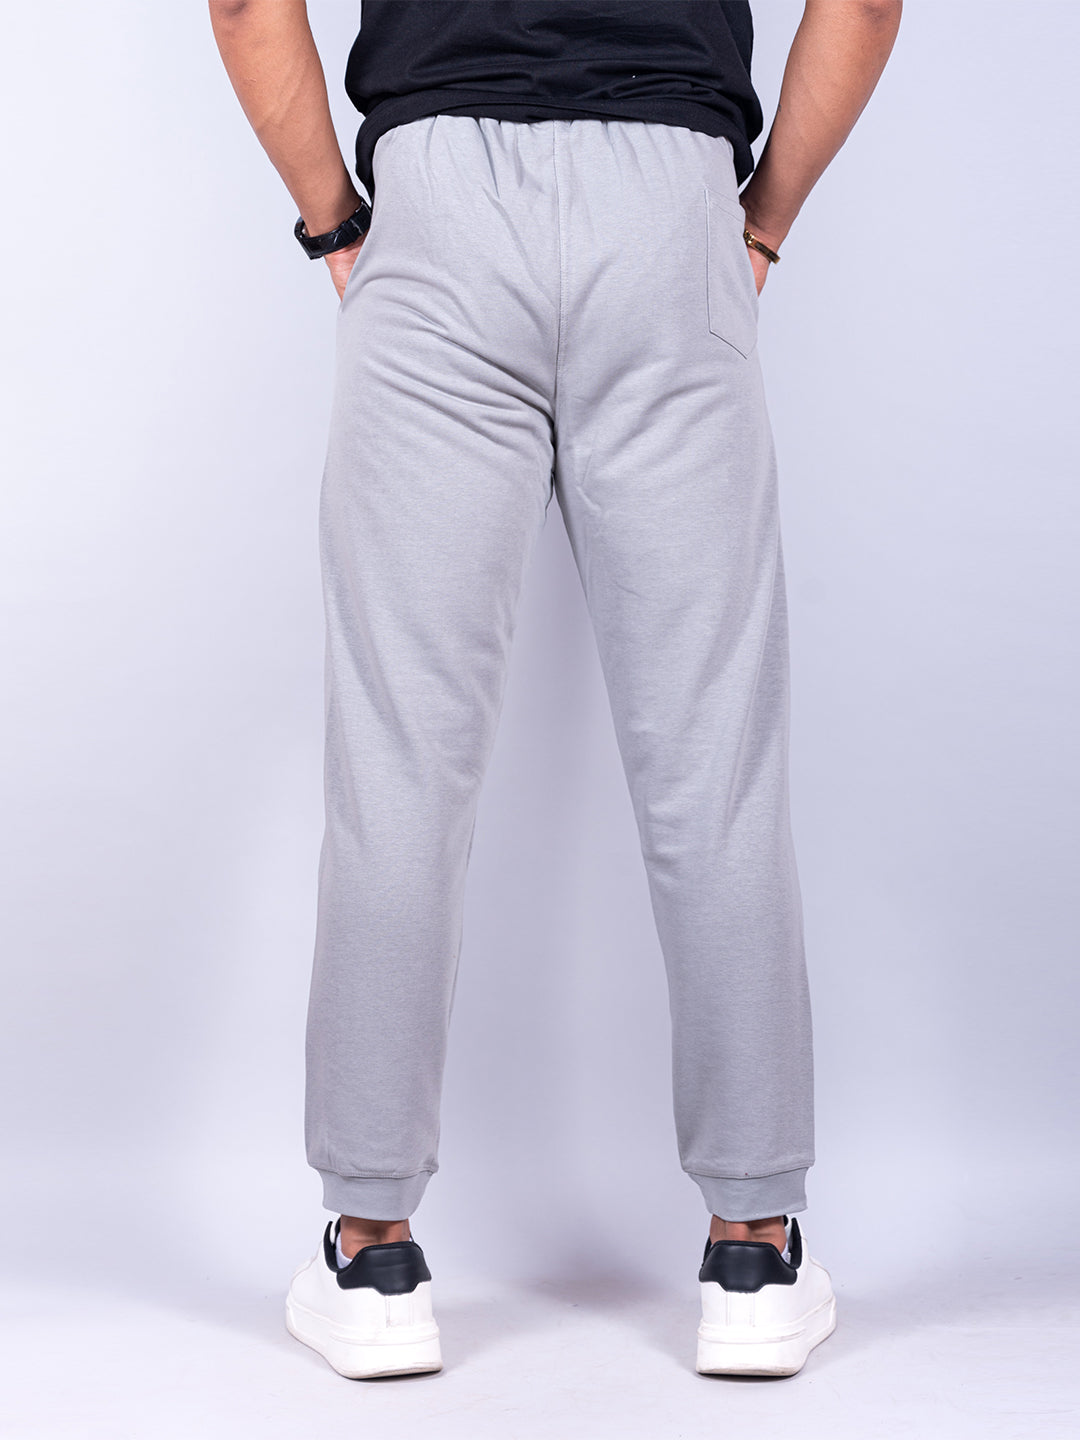 Pritned Grey joggers